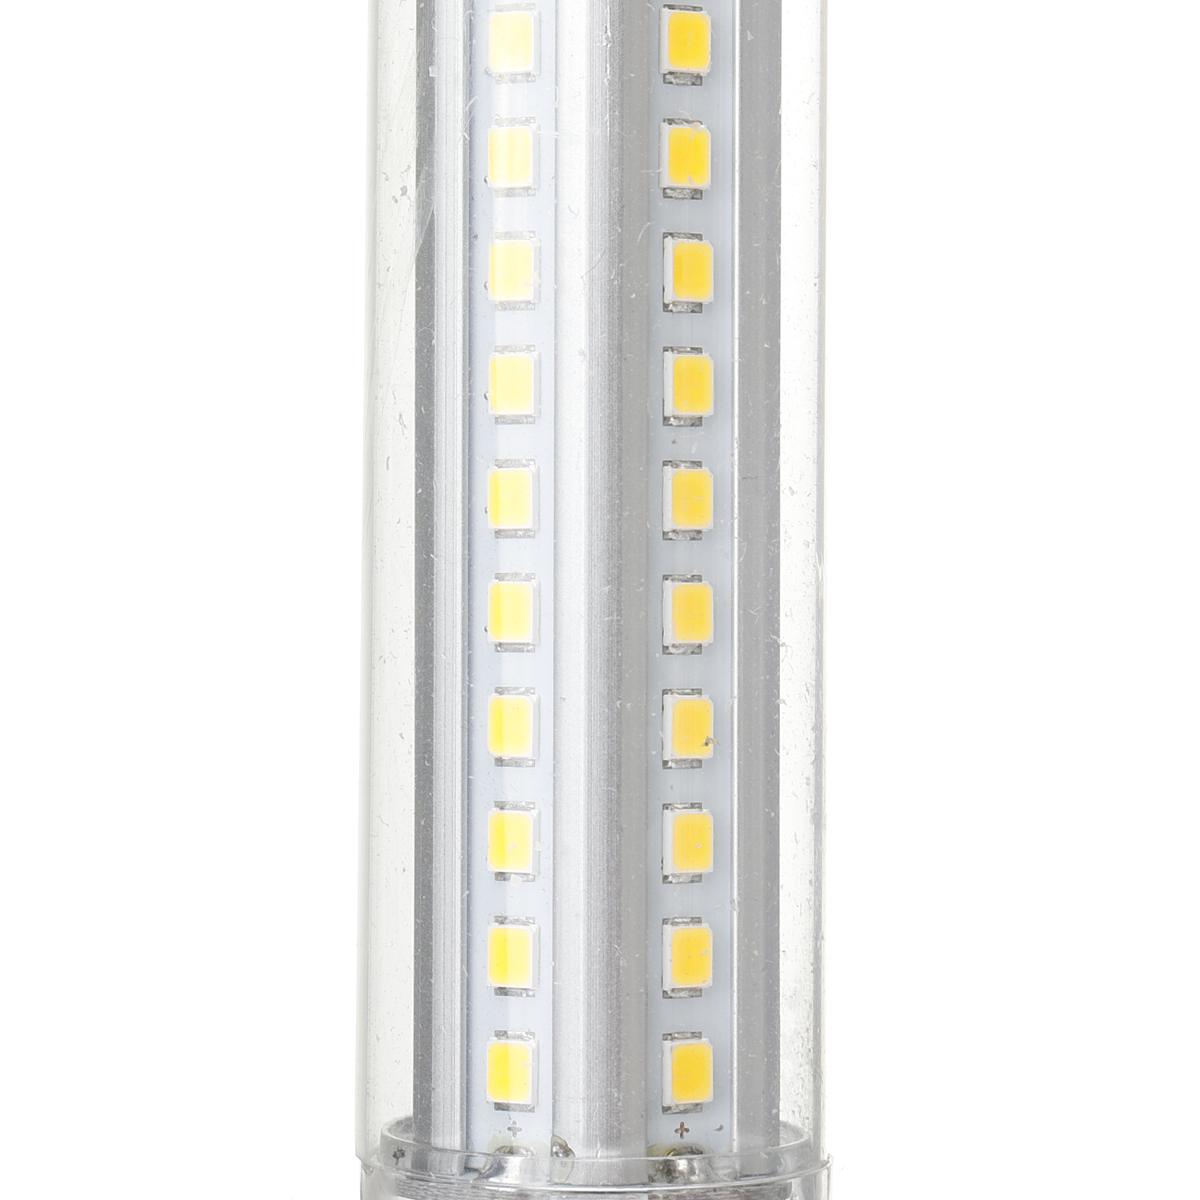 Dimmable-5W-10W-12W-15W-R7S-LED-Corn-Bulb-2835-SMD-Floodlight-Replace-Halogen-Lamp-Indoor-Home-Light-1728600-6